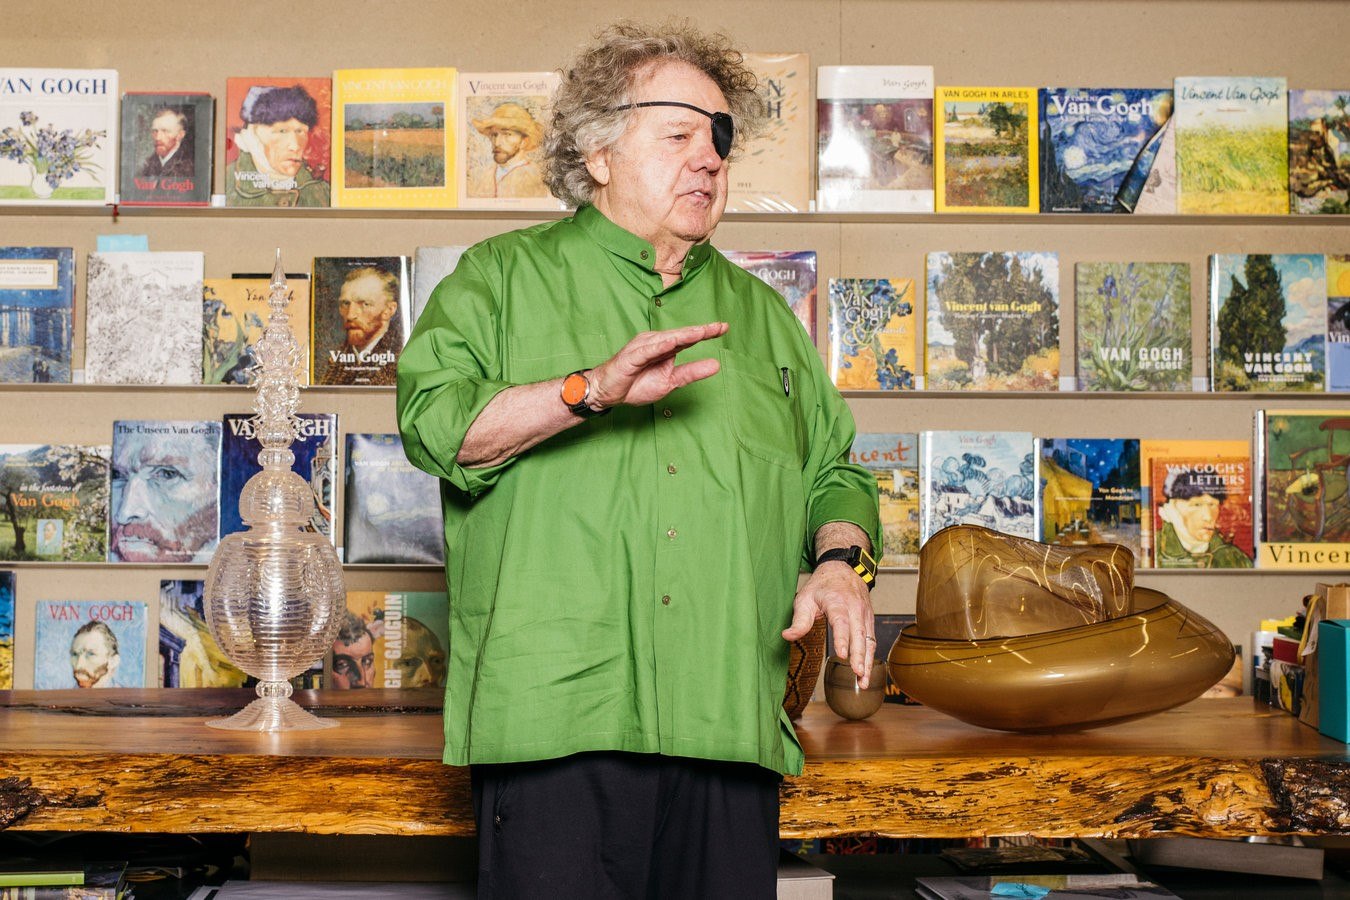 21 Surprising Facts About Dale Chihuly - Facts.net